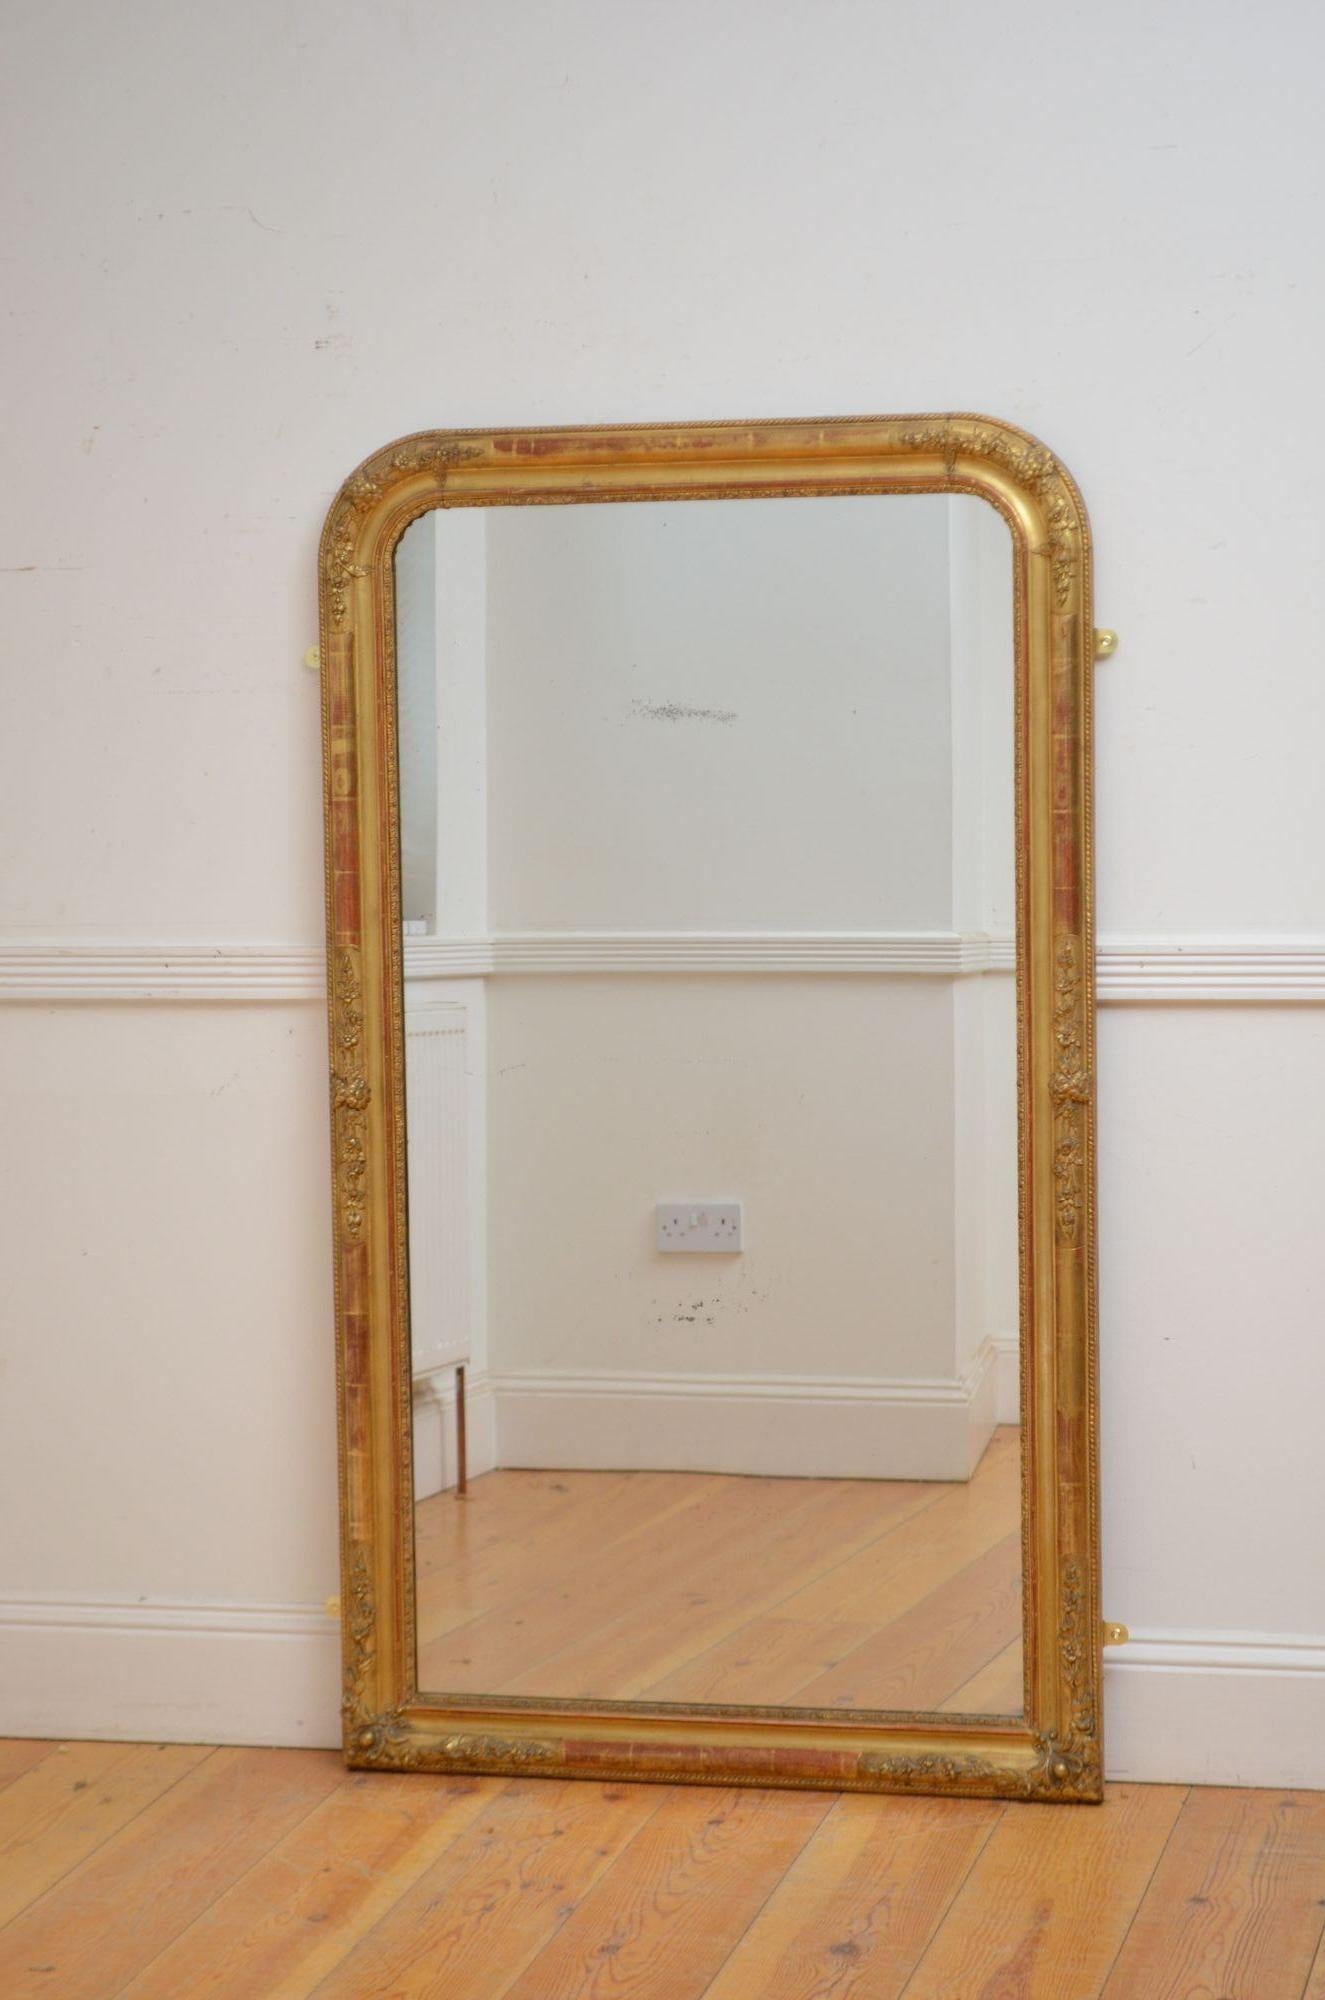 Sn5551 A large French gilded wall mirror of arched form, having original glass with some foxing in moulded and carved gilded frame with carved floral decoration throughout. This antique mirror retains its original glass, original gilt and original